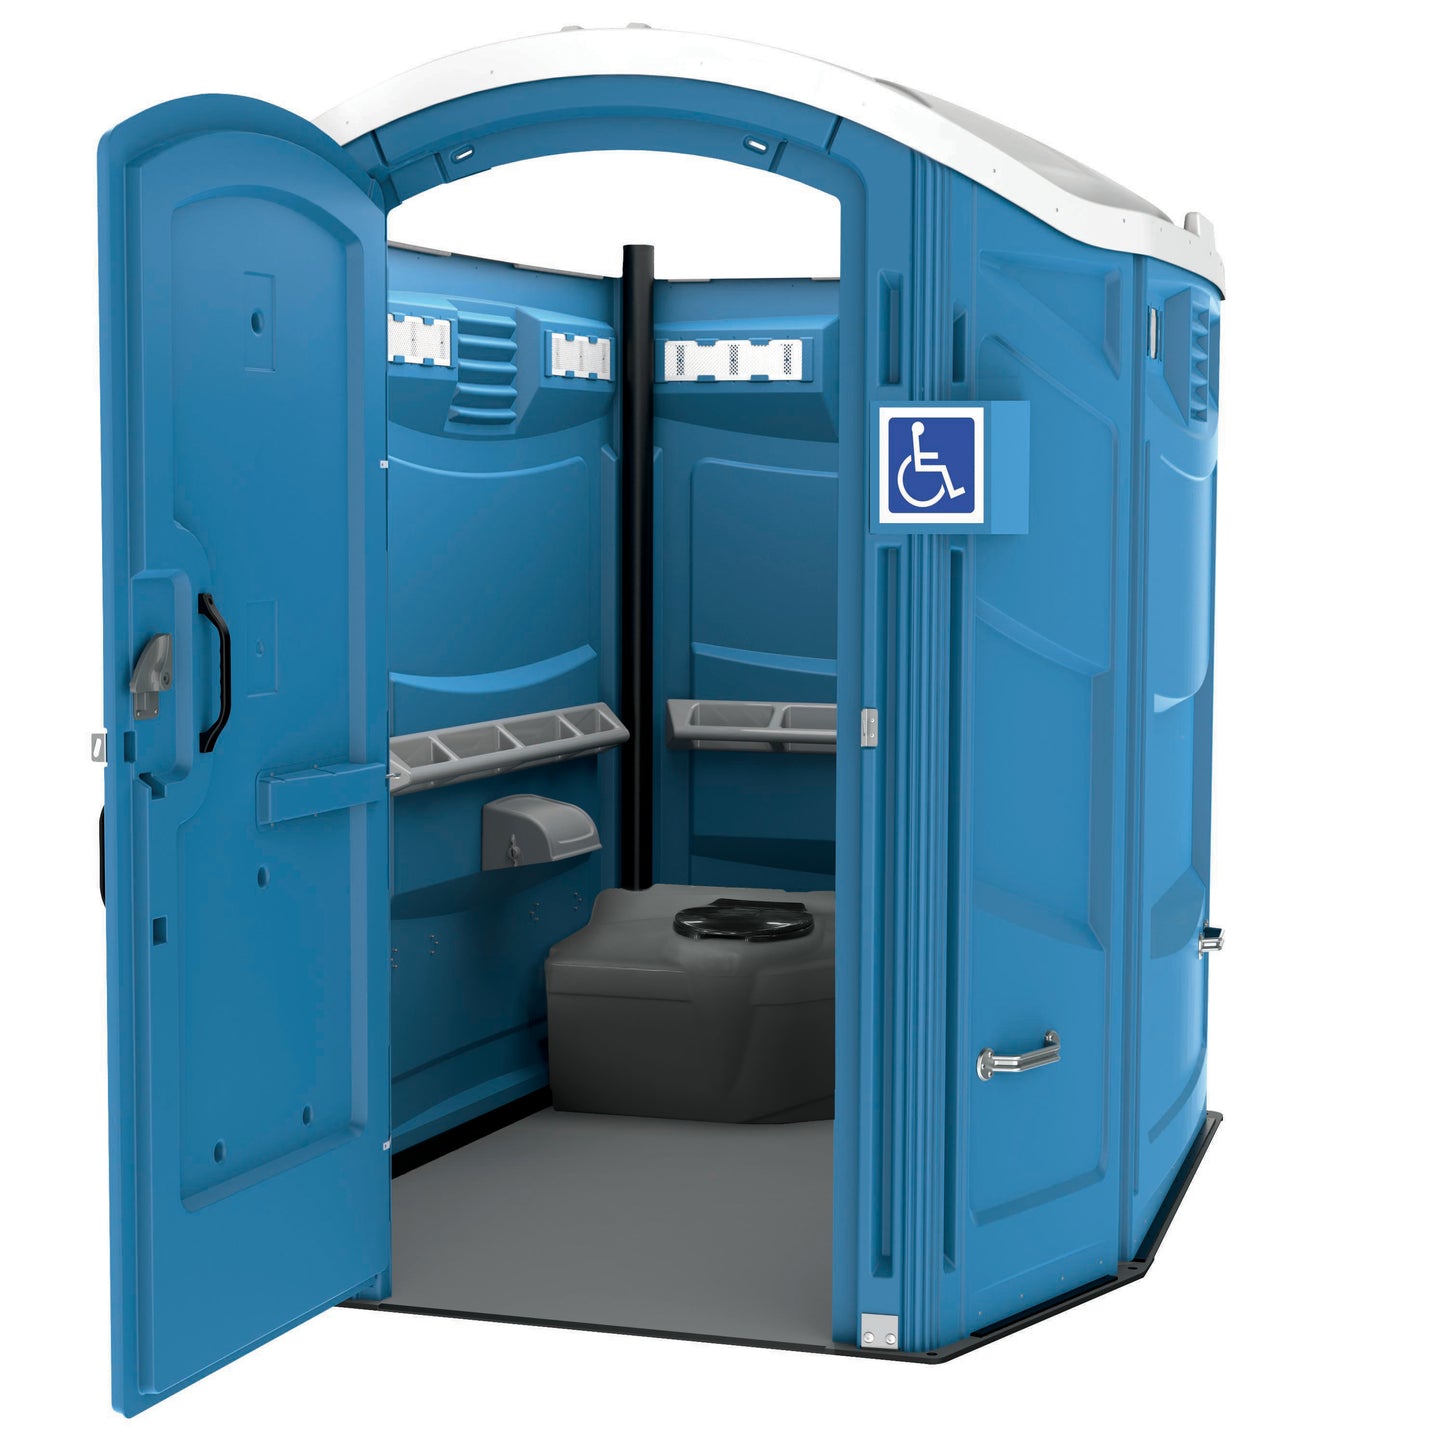 An open ADA handicap potty rental at an outdoor event venue, providing accessibility and comfort to all attendees.